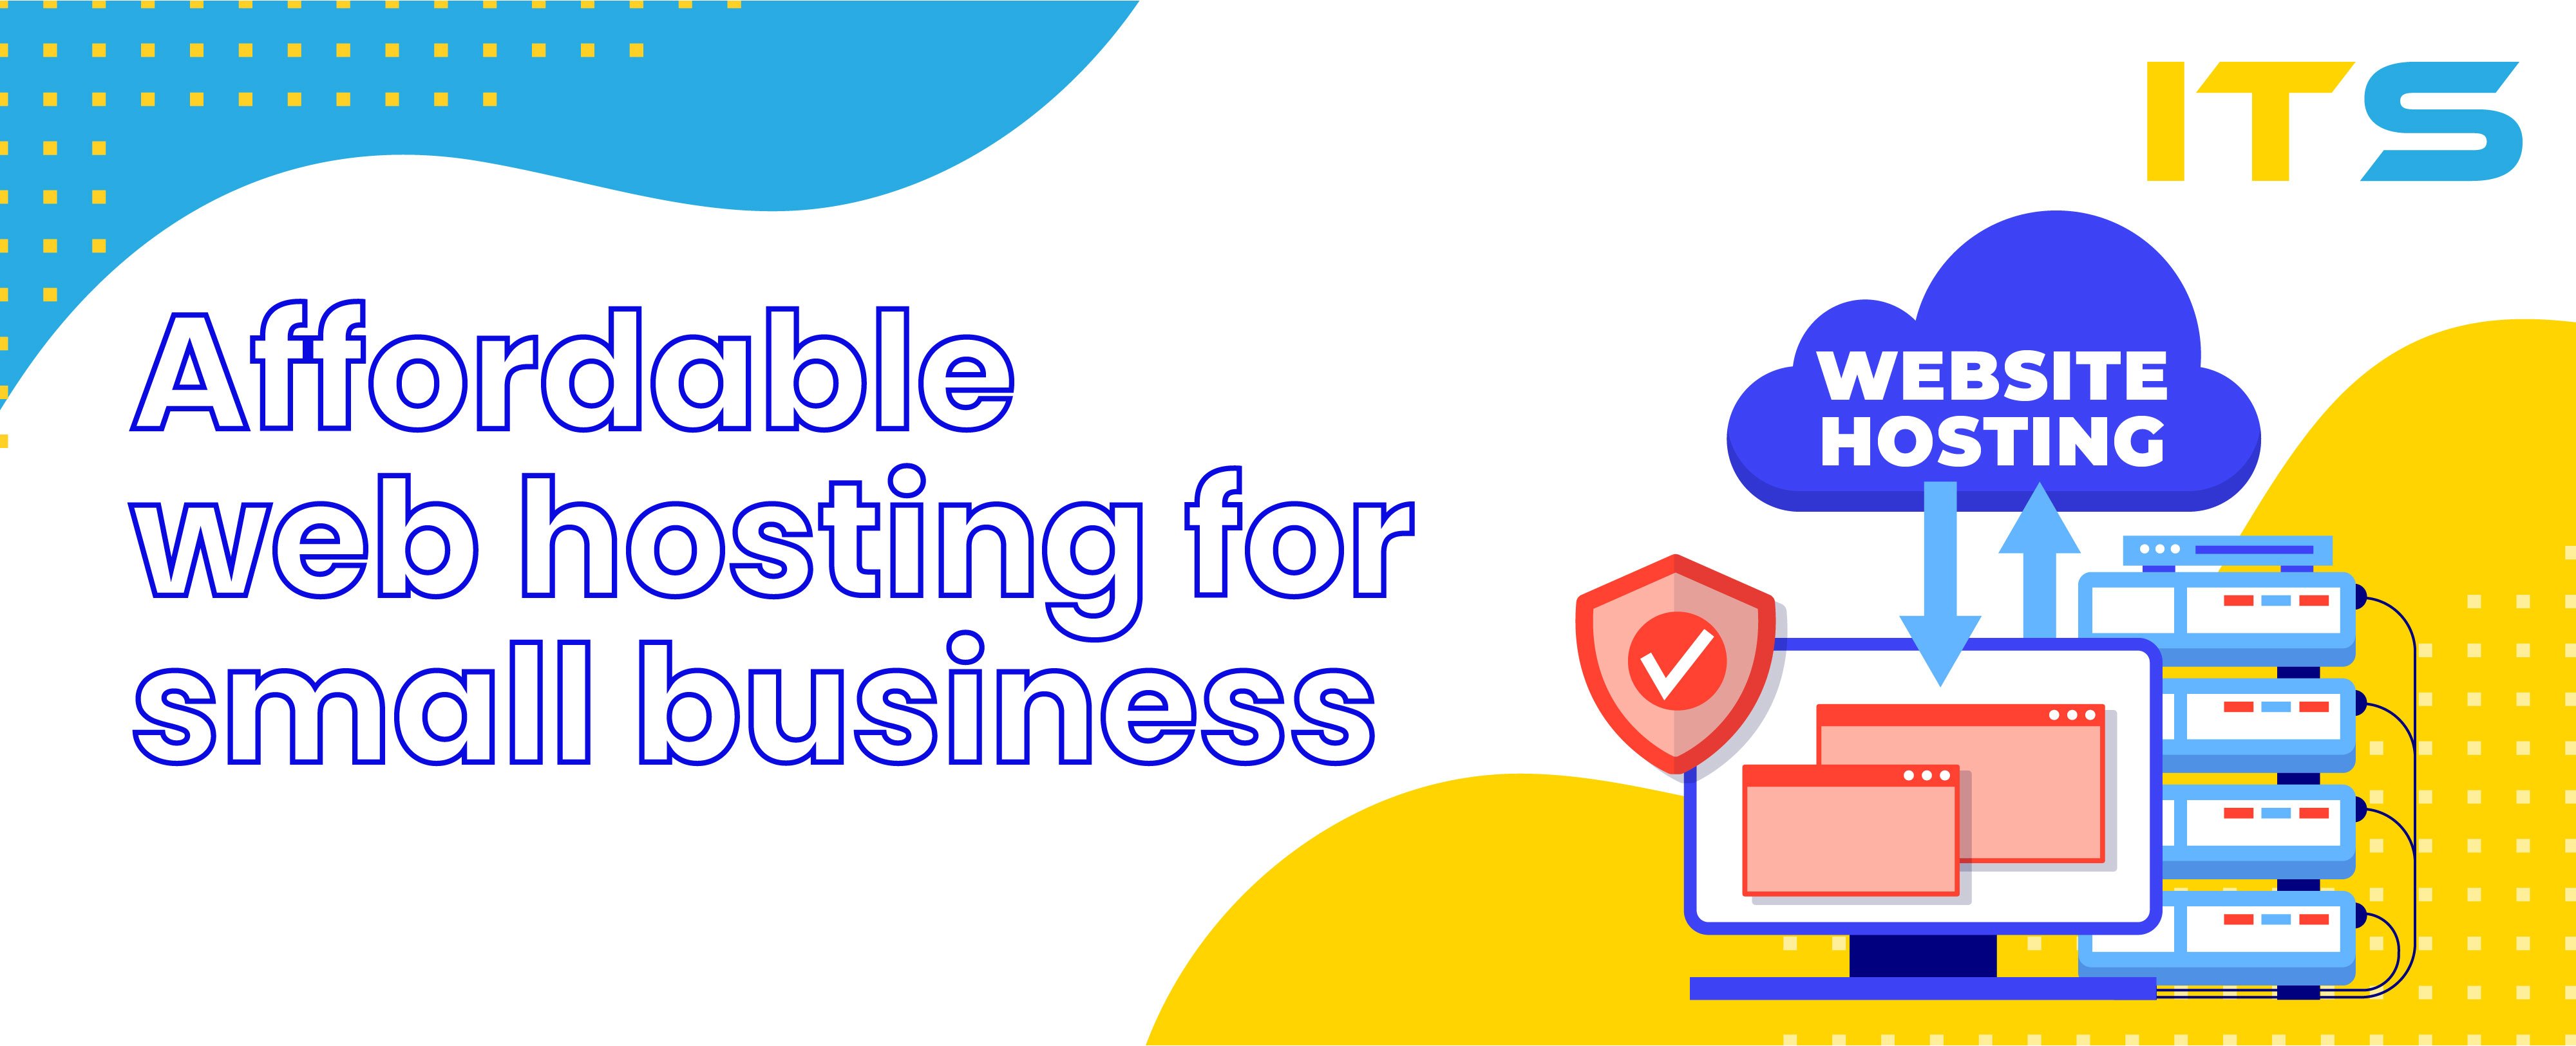 Affordable web hosting for small business